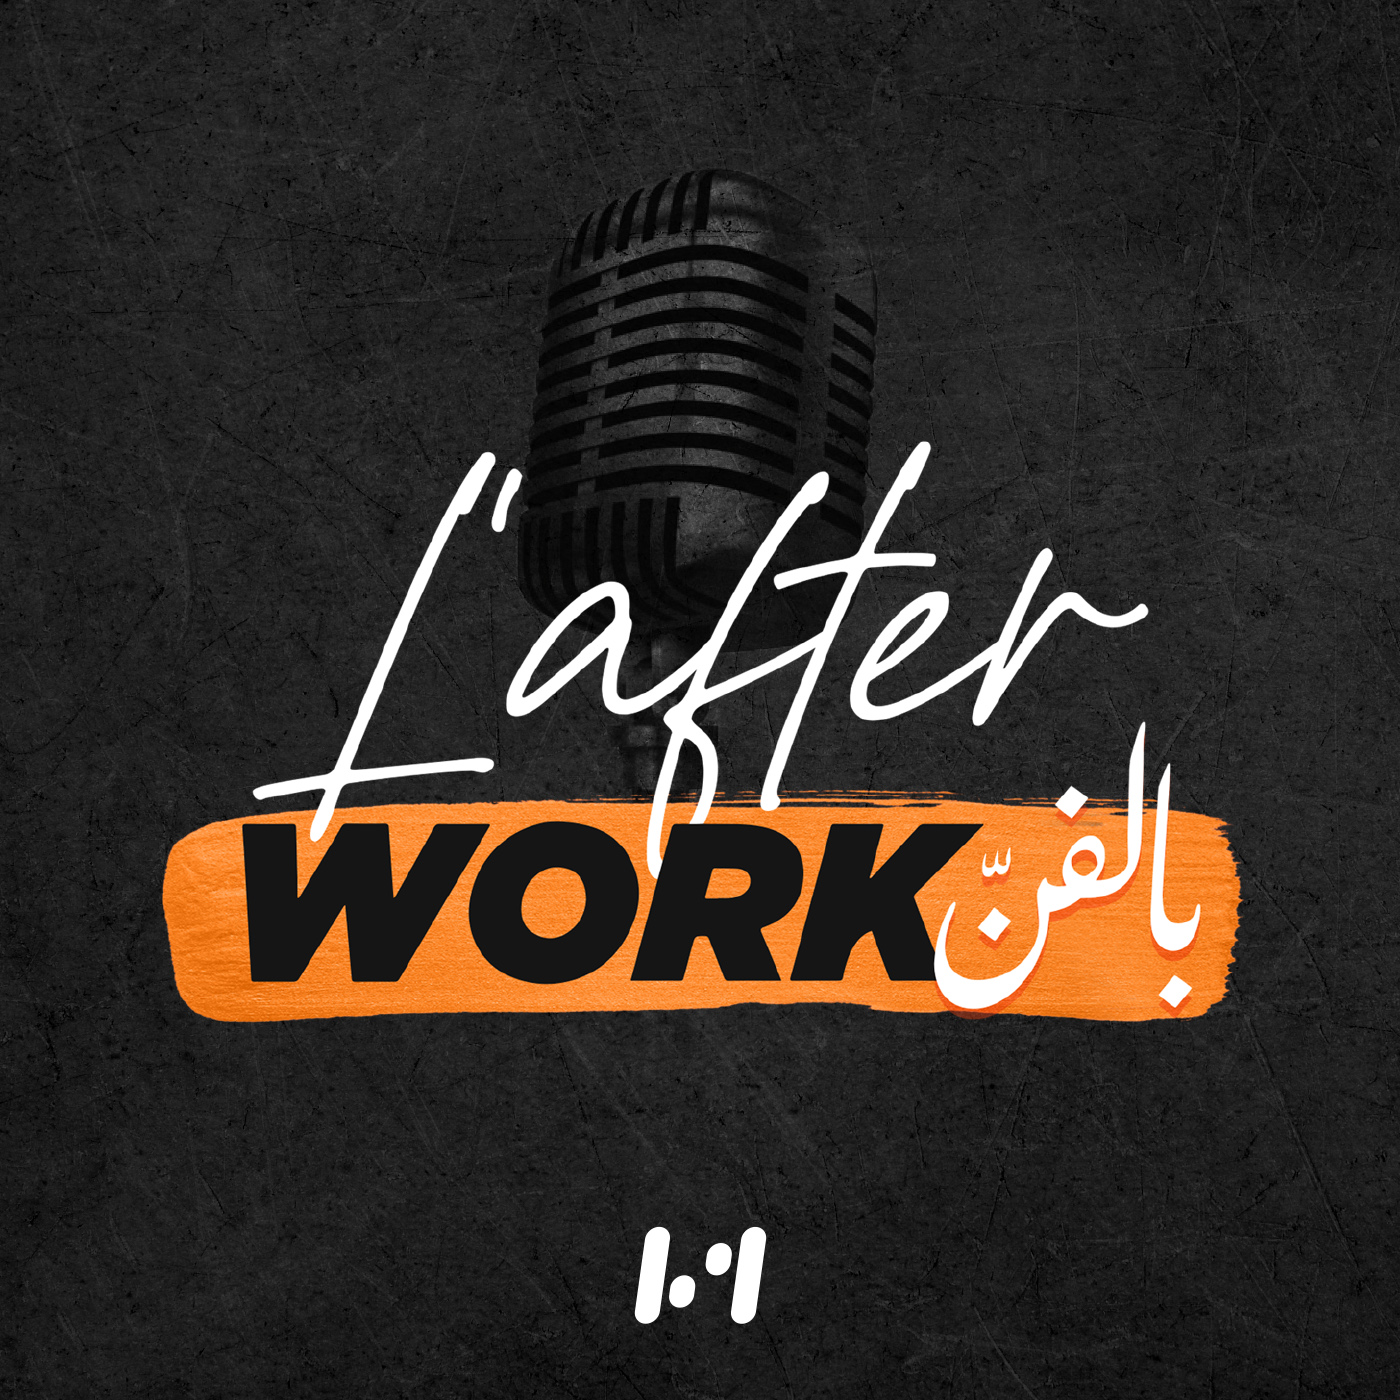 L’after work بالـفن